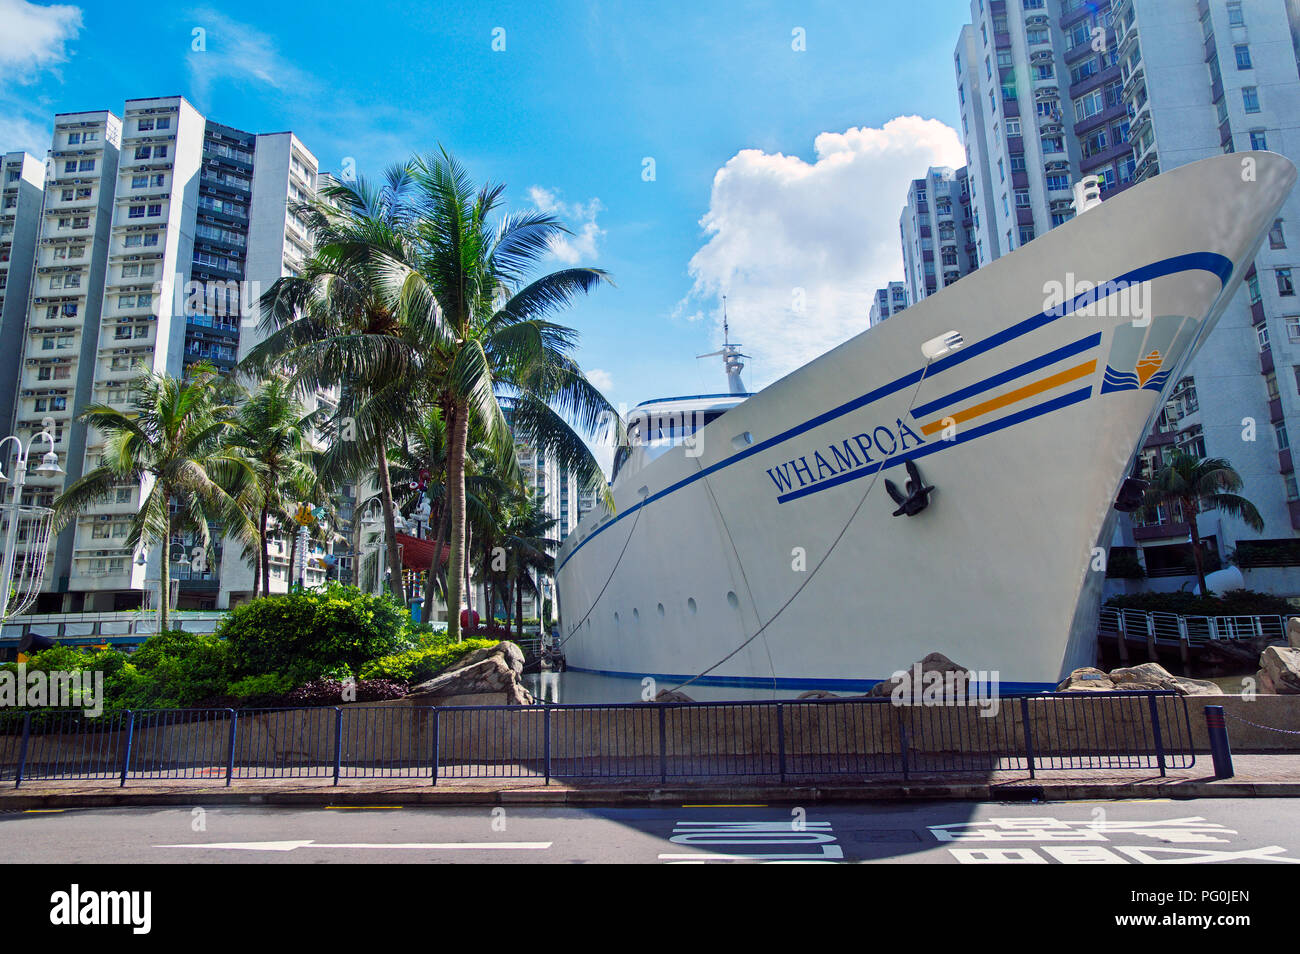 08.01.2018: A shopping center in the form of a ship in the middle of Whampoa township in Hong Kong Stock Photo